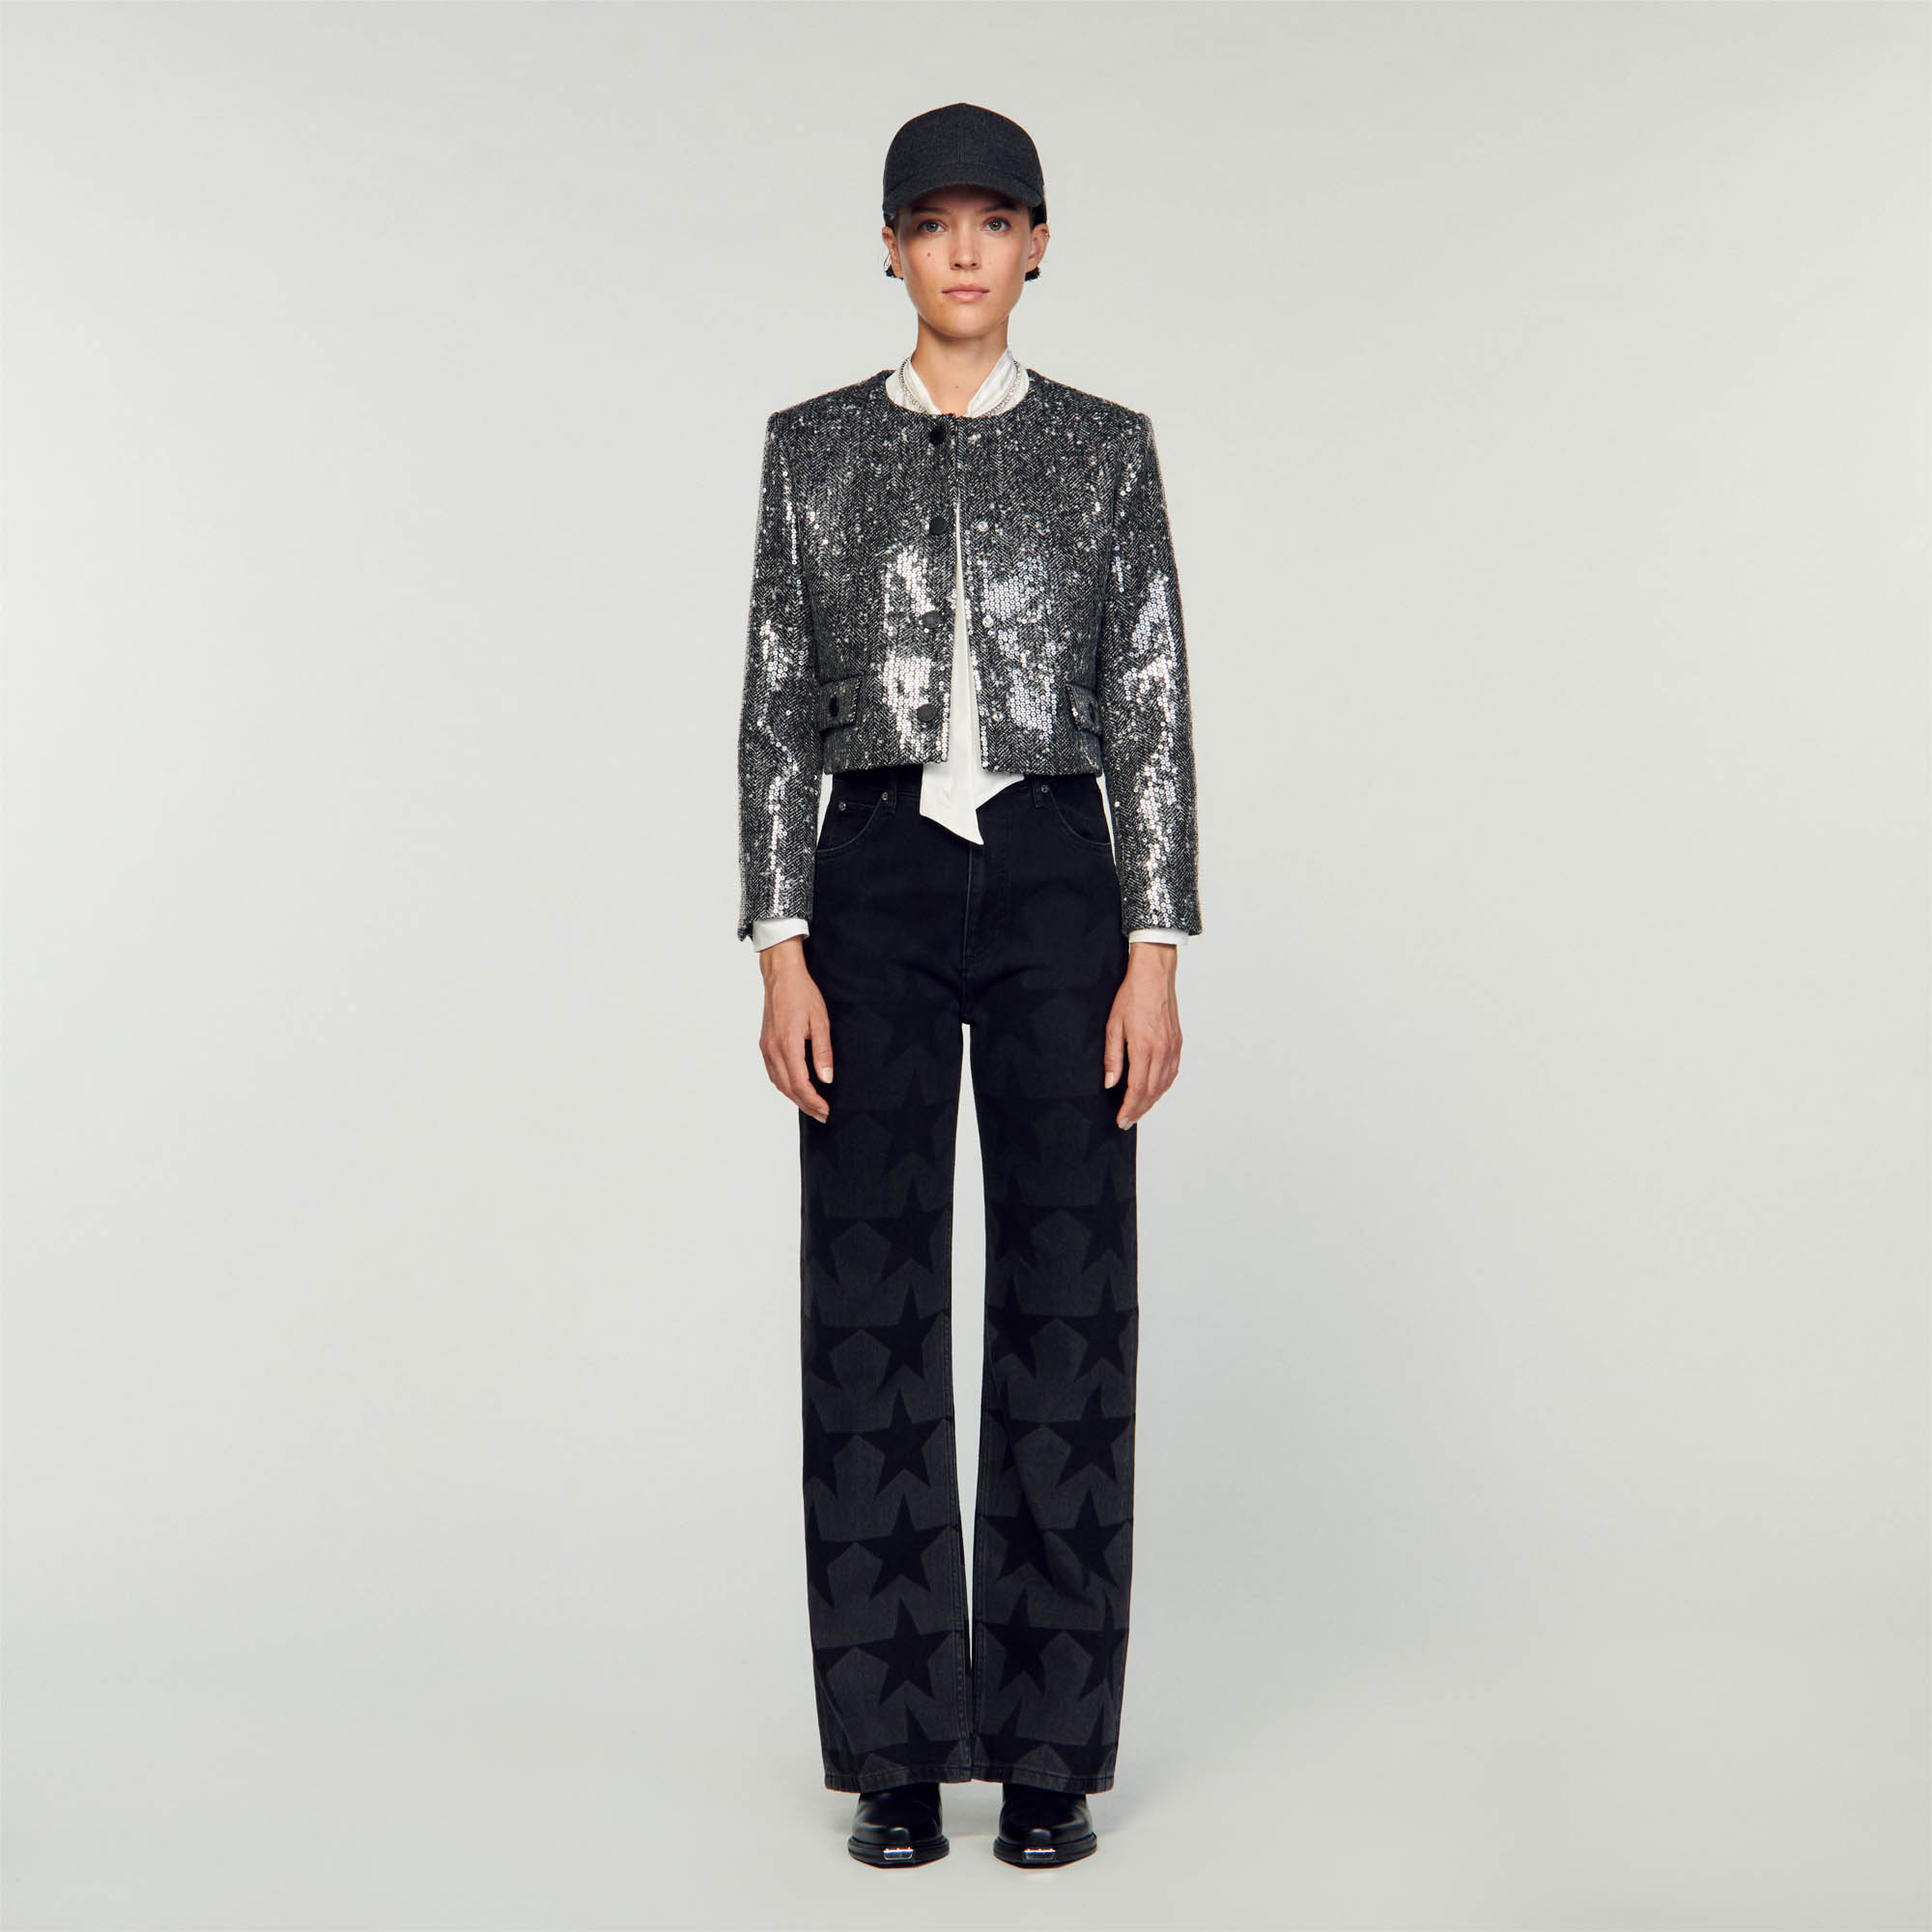 Sandro polyester Short, structured wool-blend jacket featuring a herringbone pattern embellished with sequins, long sleeves, Sandro-stamped press studs and flap pockets on the waist